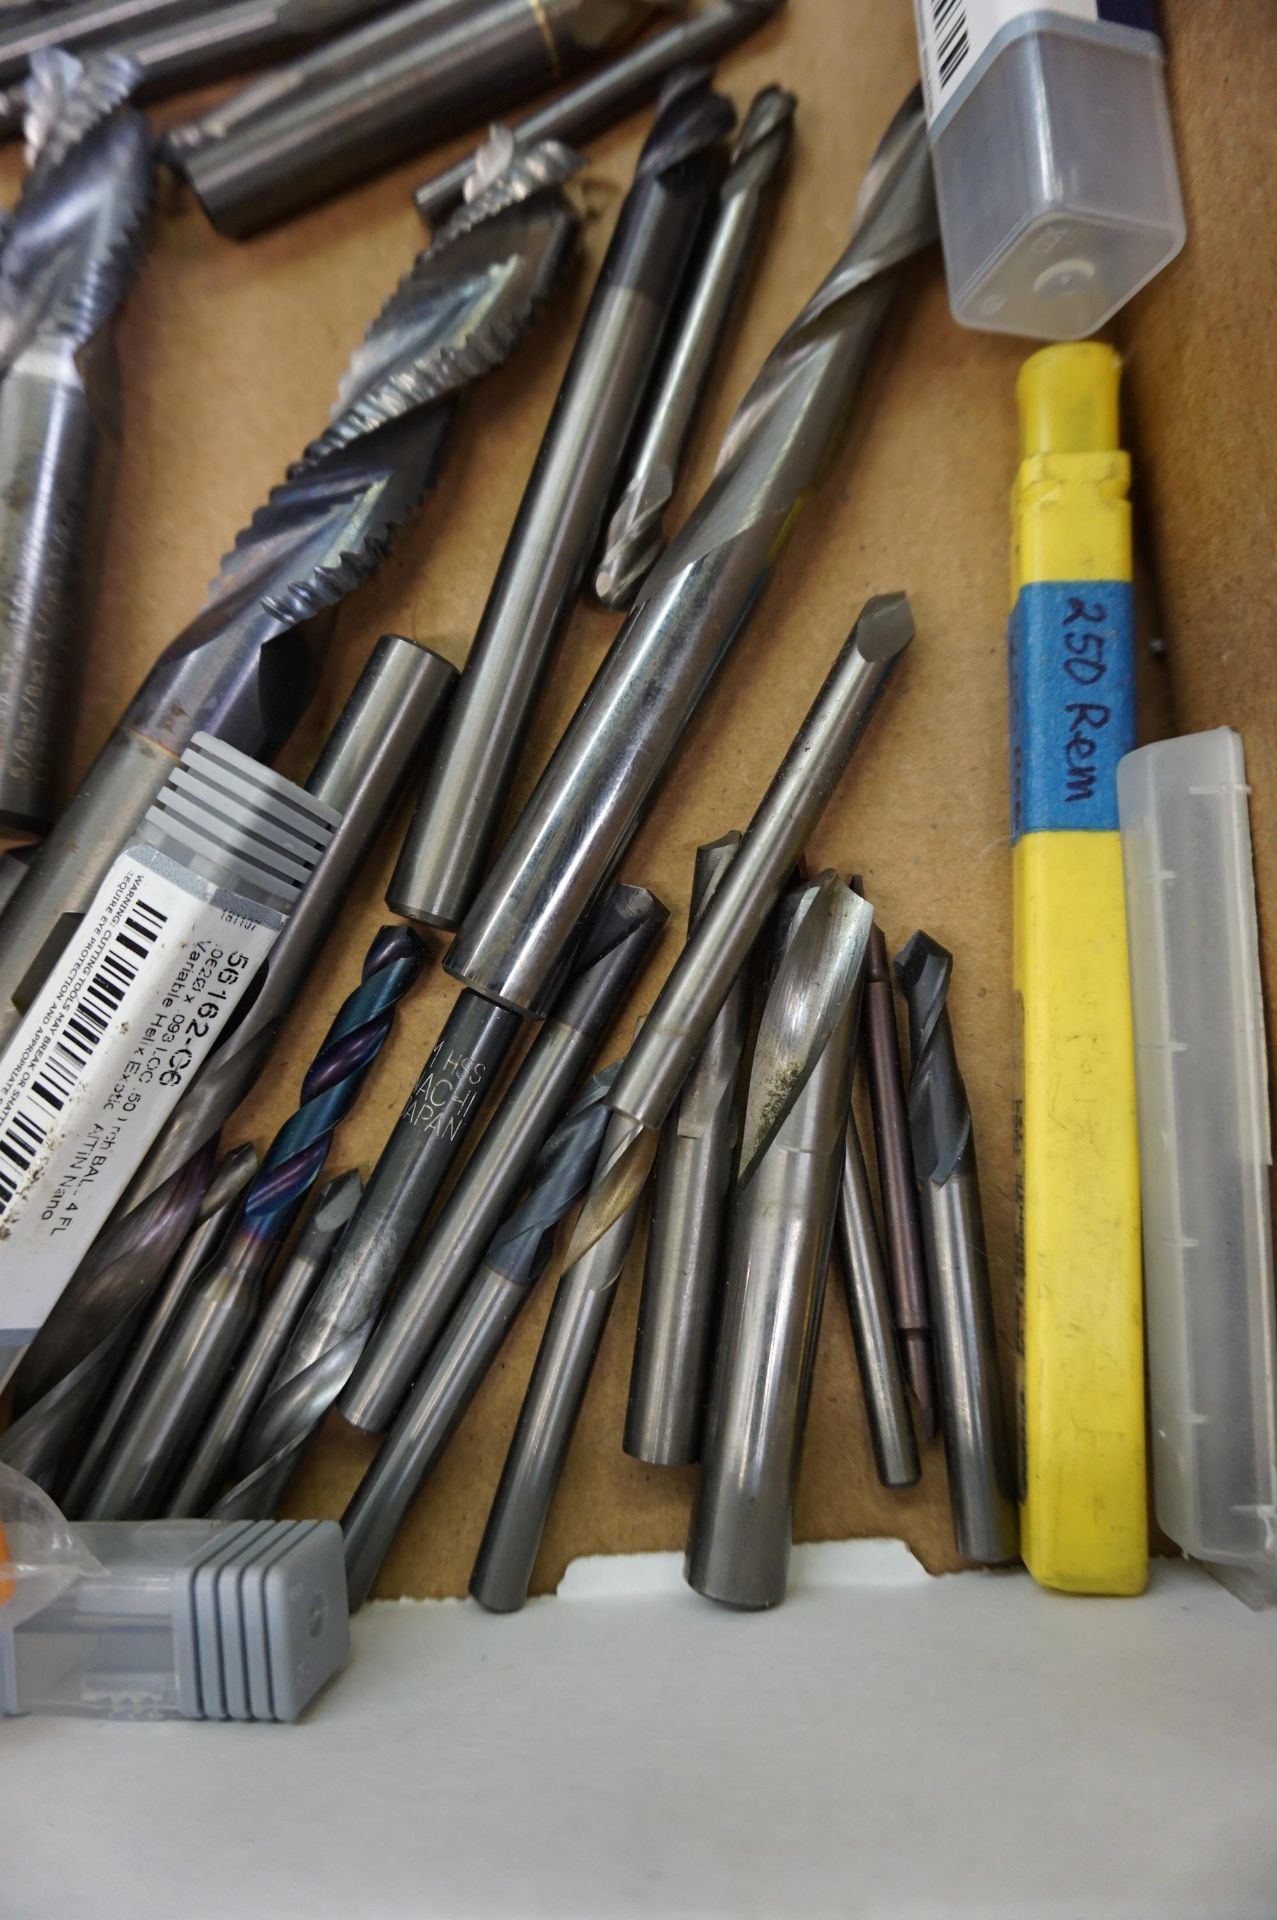 MISC. CARBIDE ROUGHING END MILLS, BALL END MILLS, DRILLS, REAMERS - Image 2 of 2